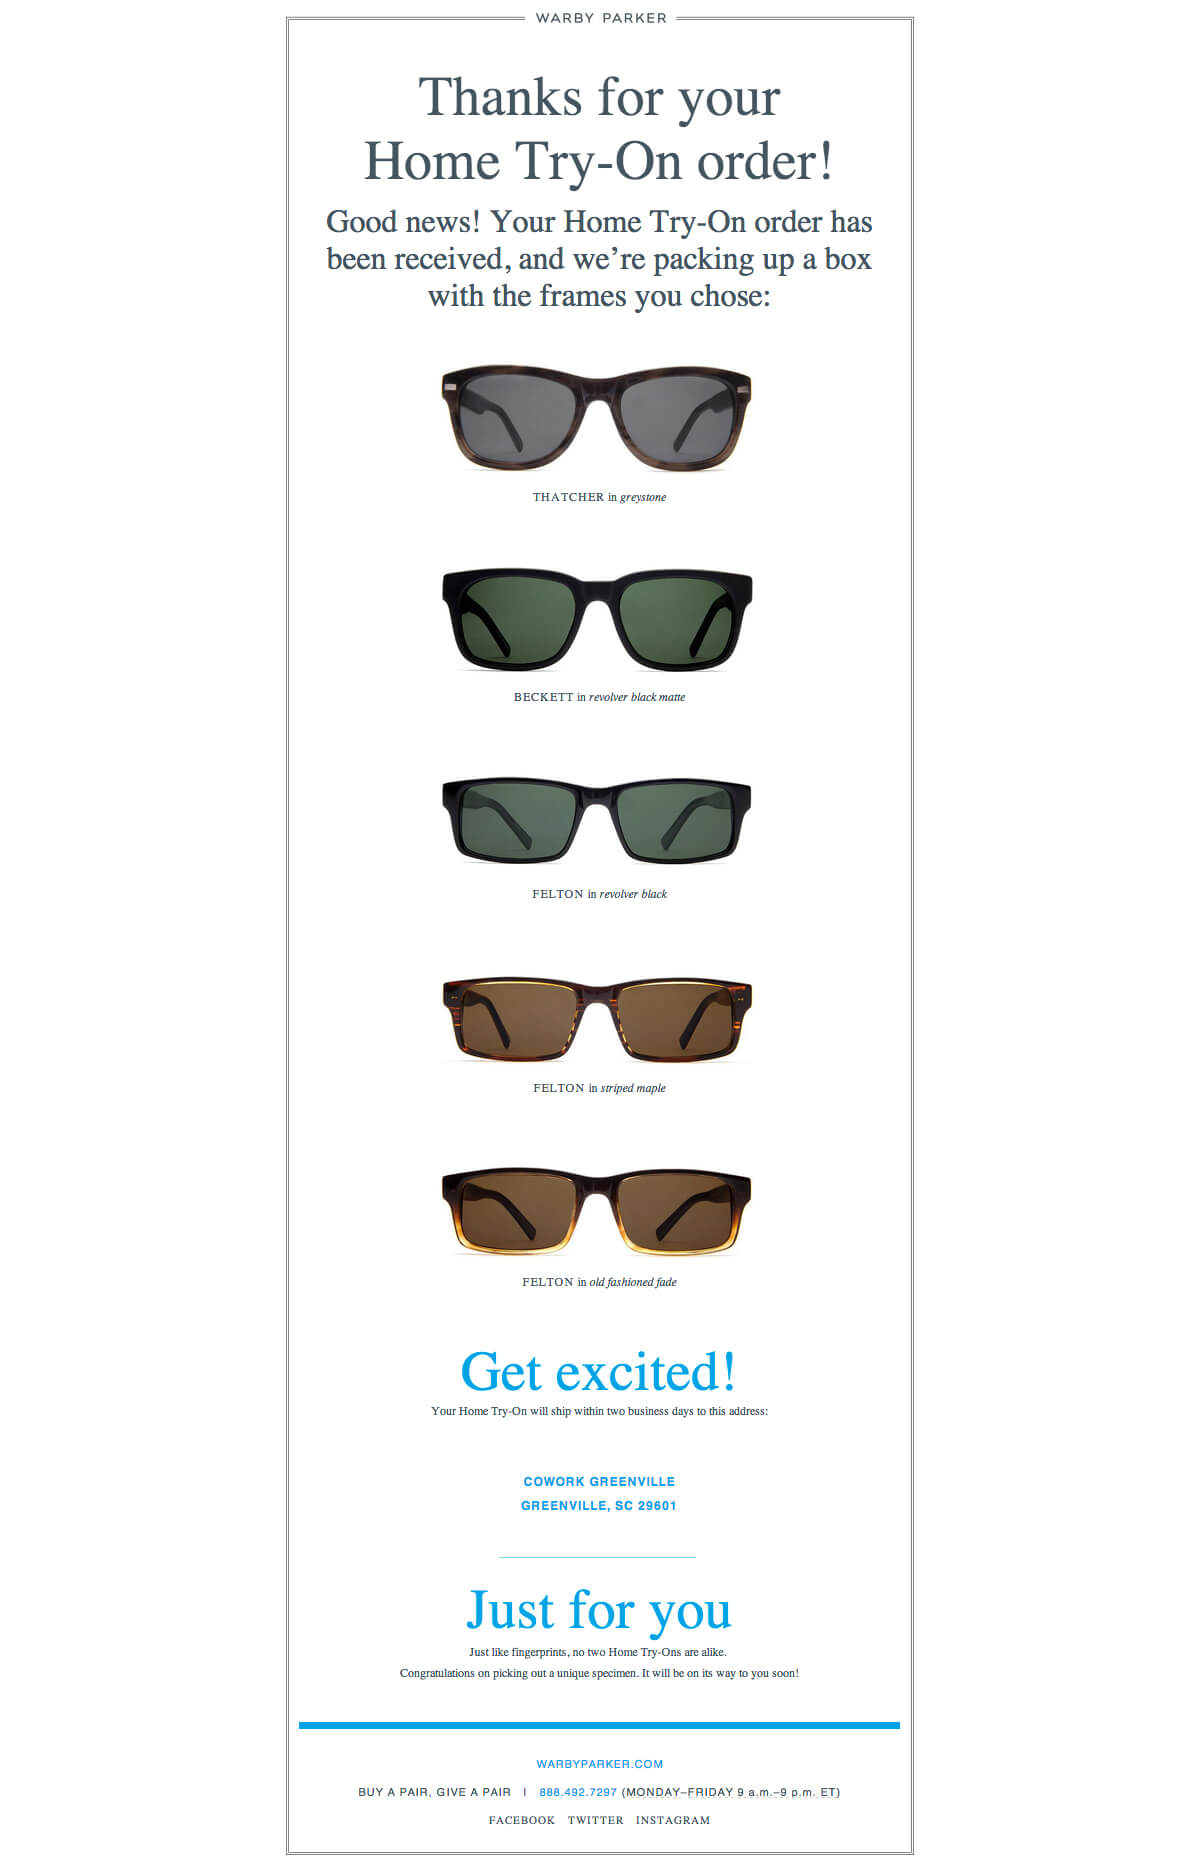 thank-you-for-your-order-warbyparker